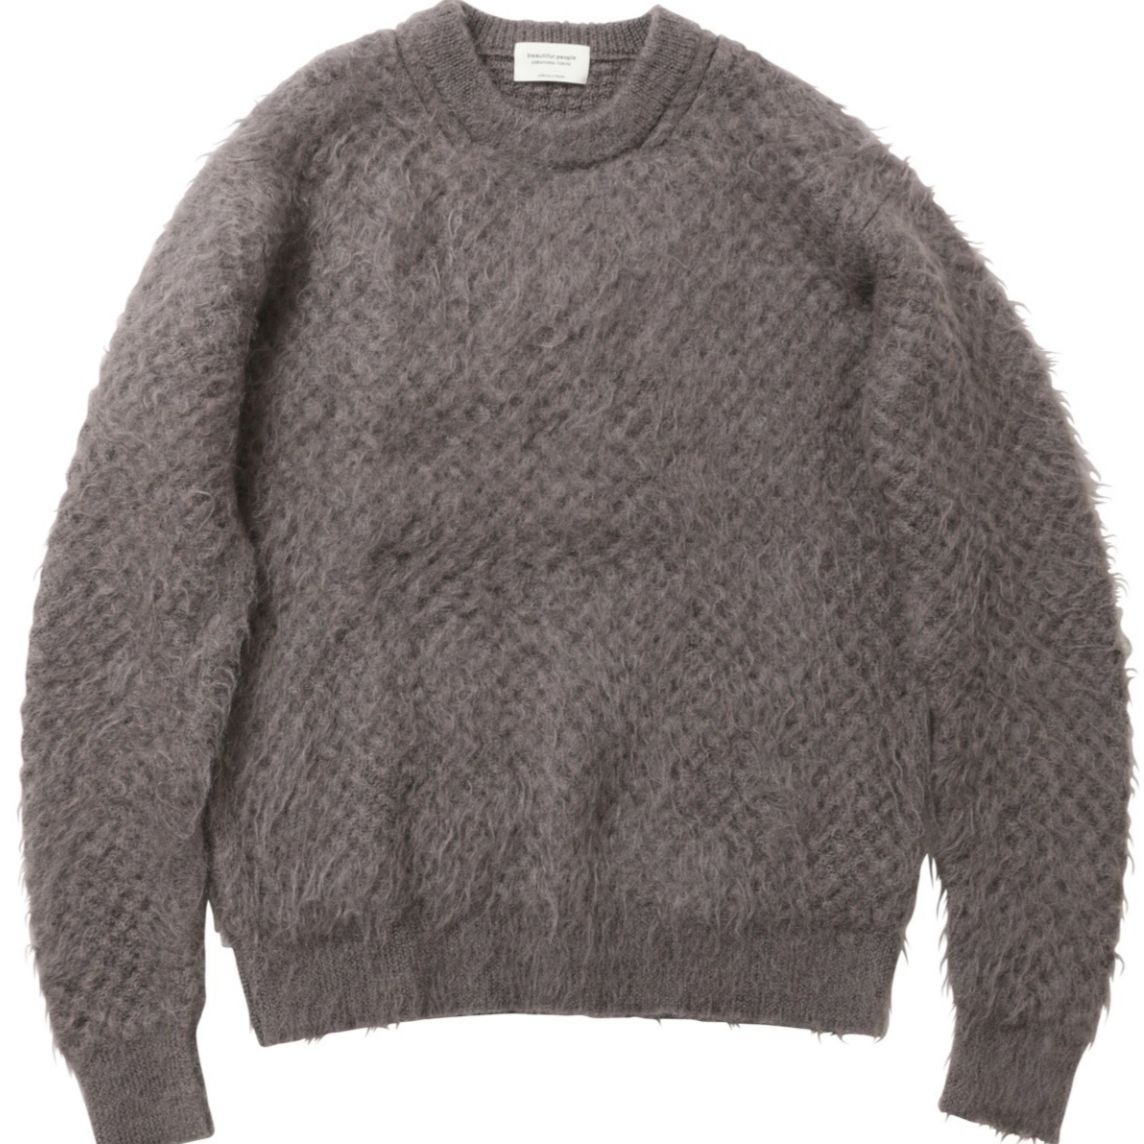 Beautiful People- Sweater crew neck kid mohair brushed